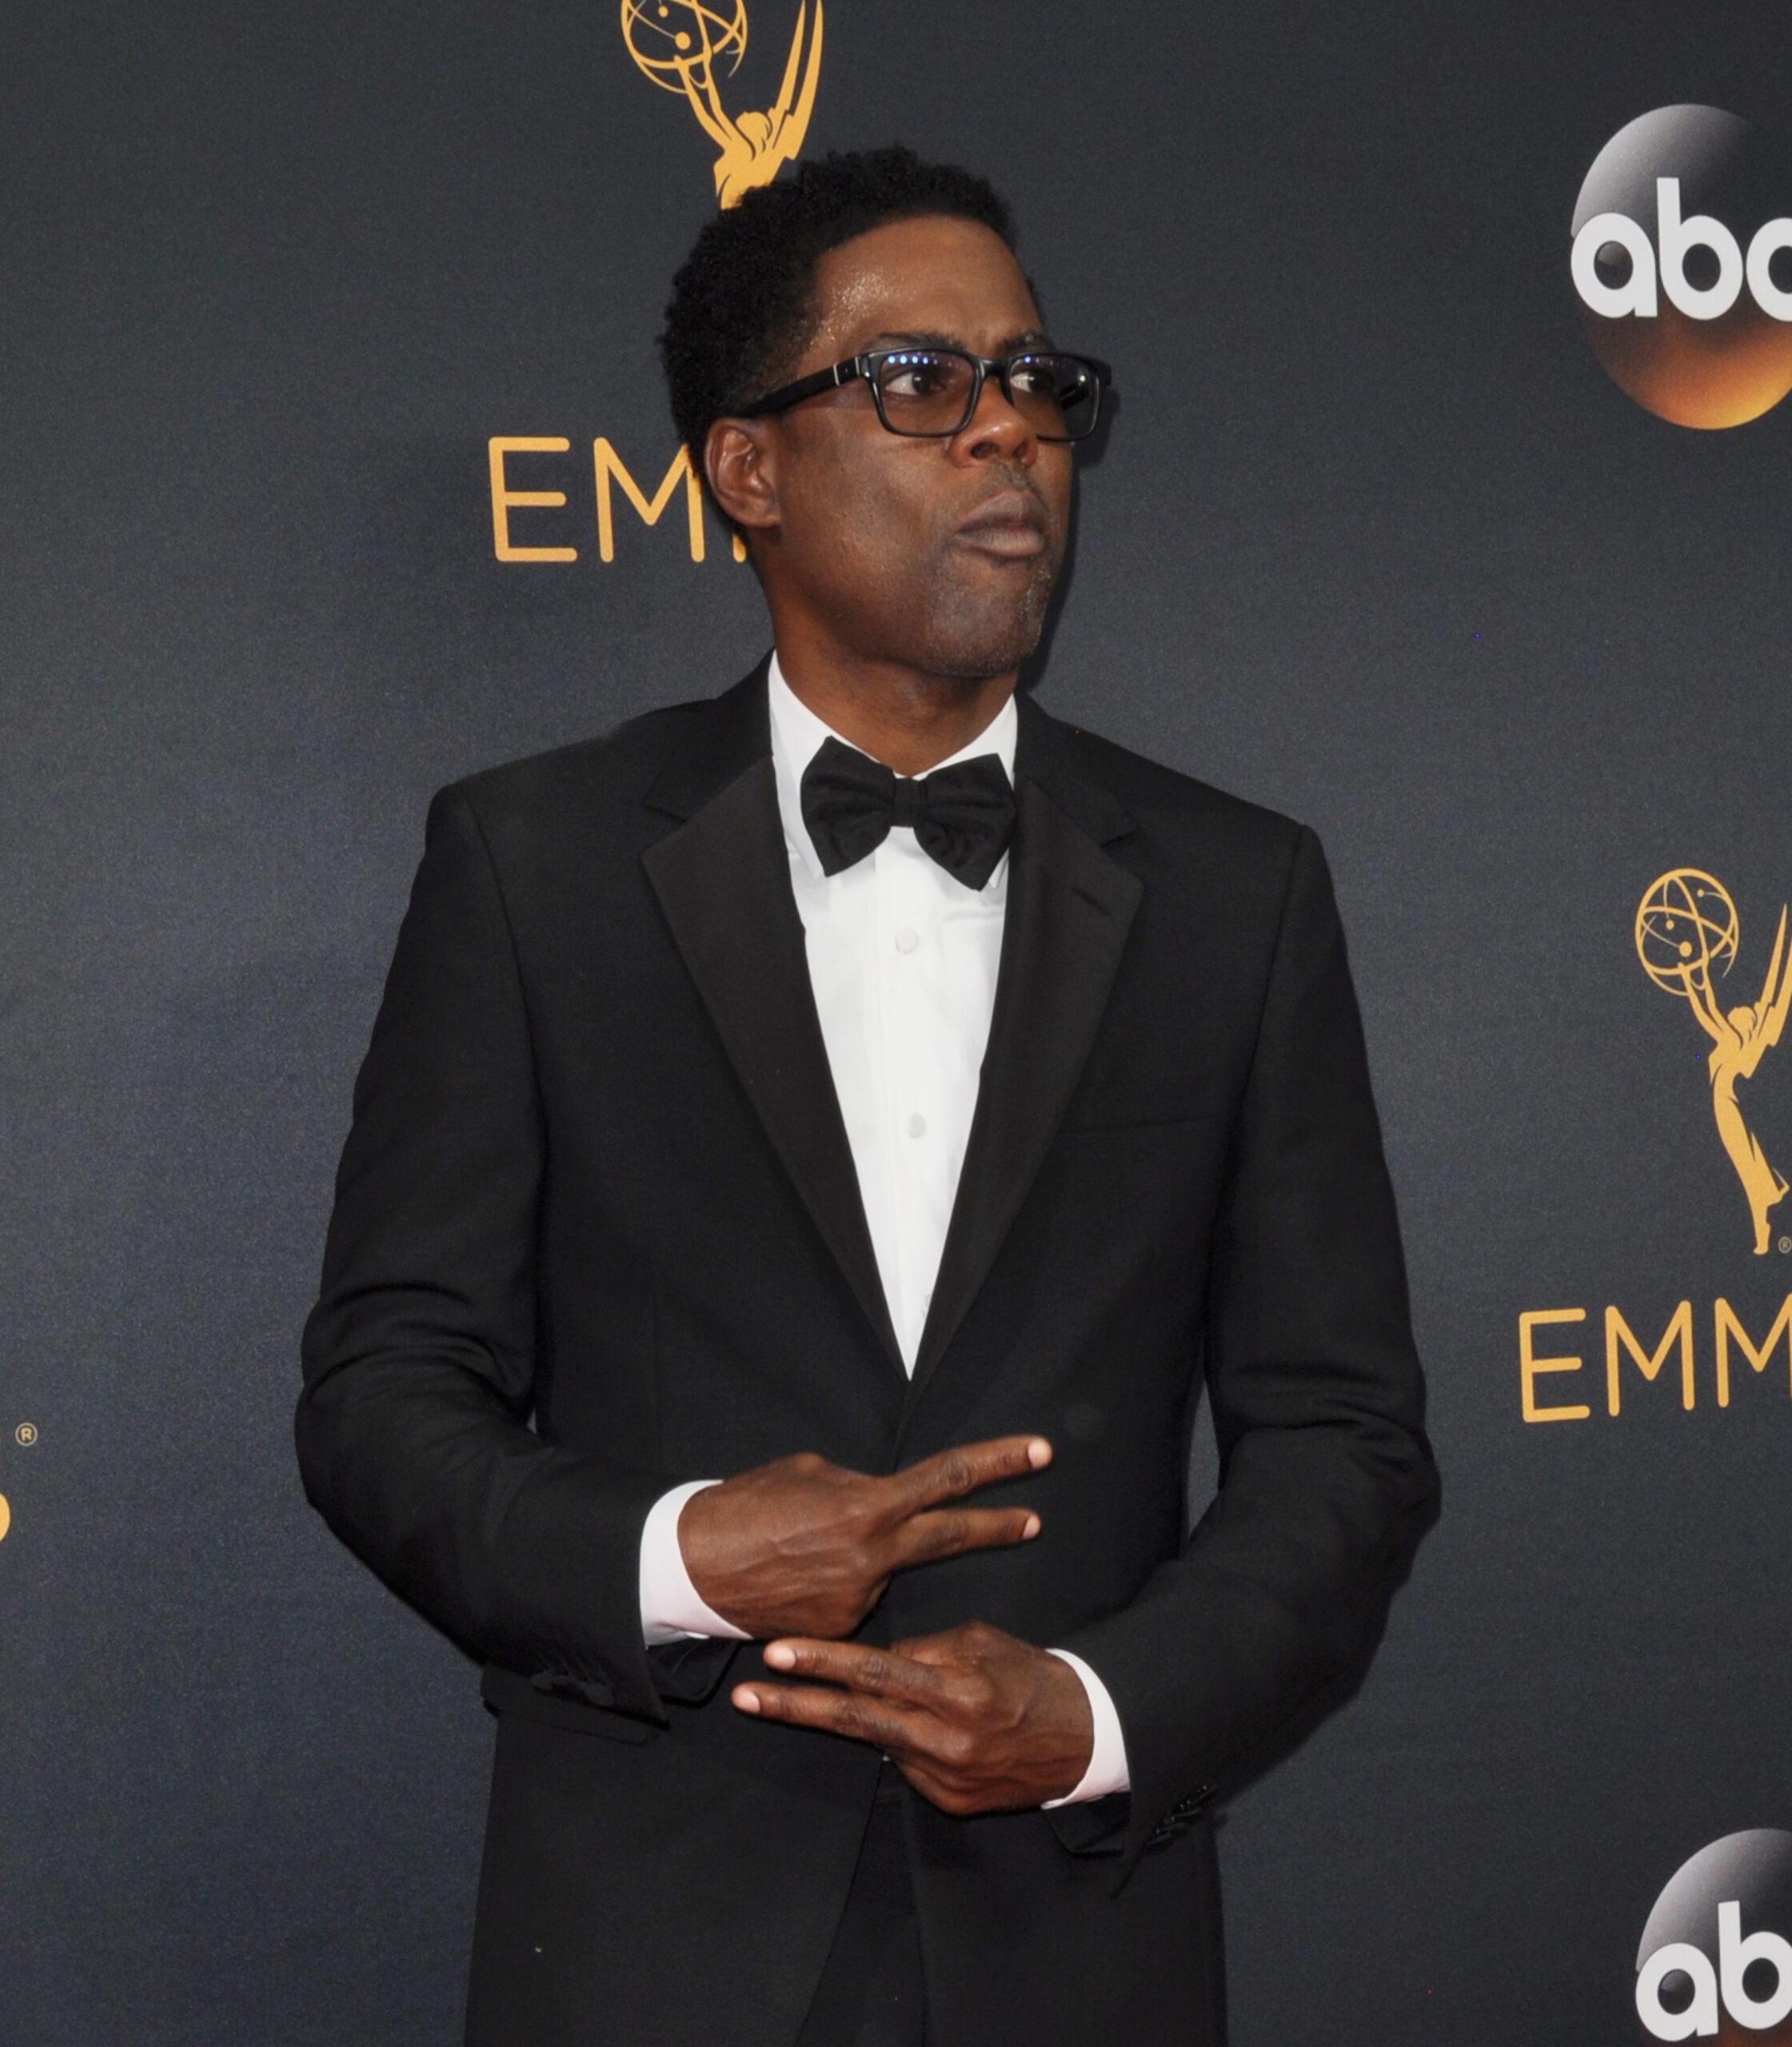 Chris Rock at the 68th Primetime Emmy Awards in Los Angeles